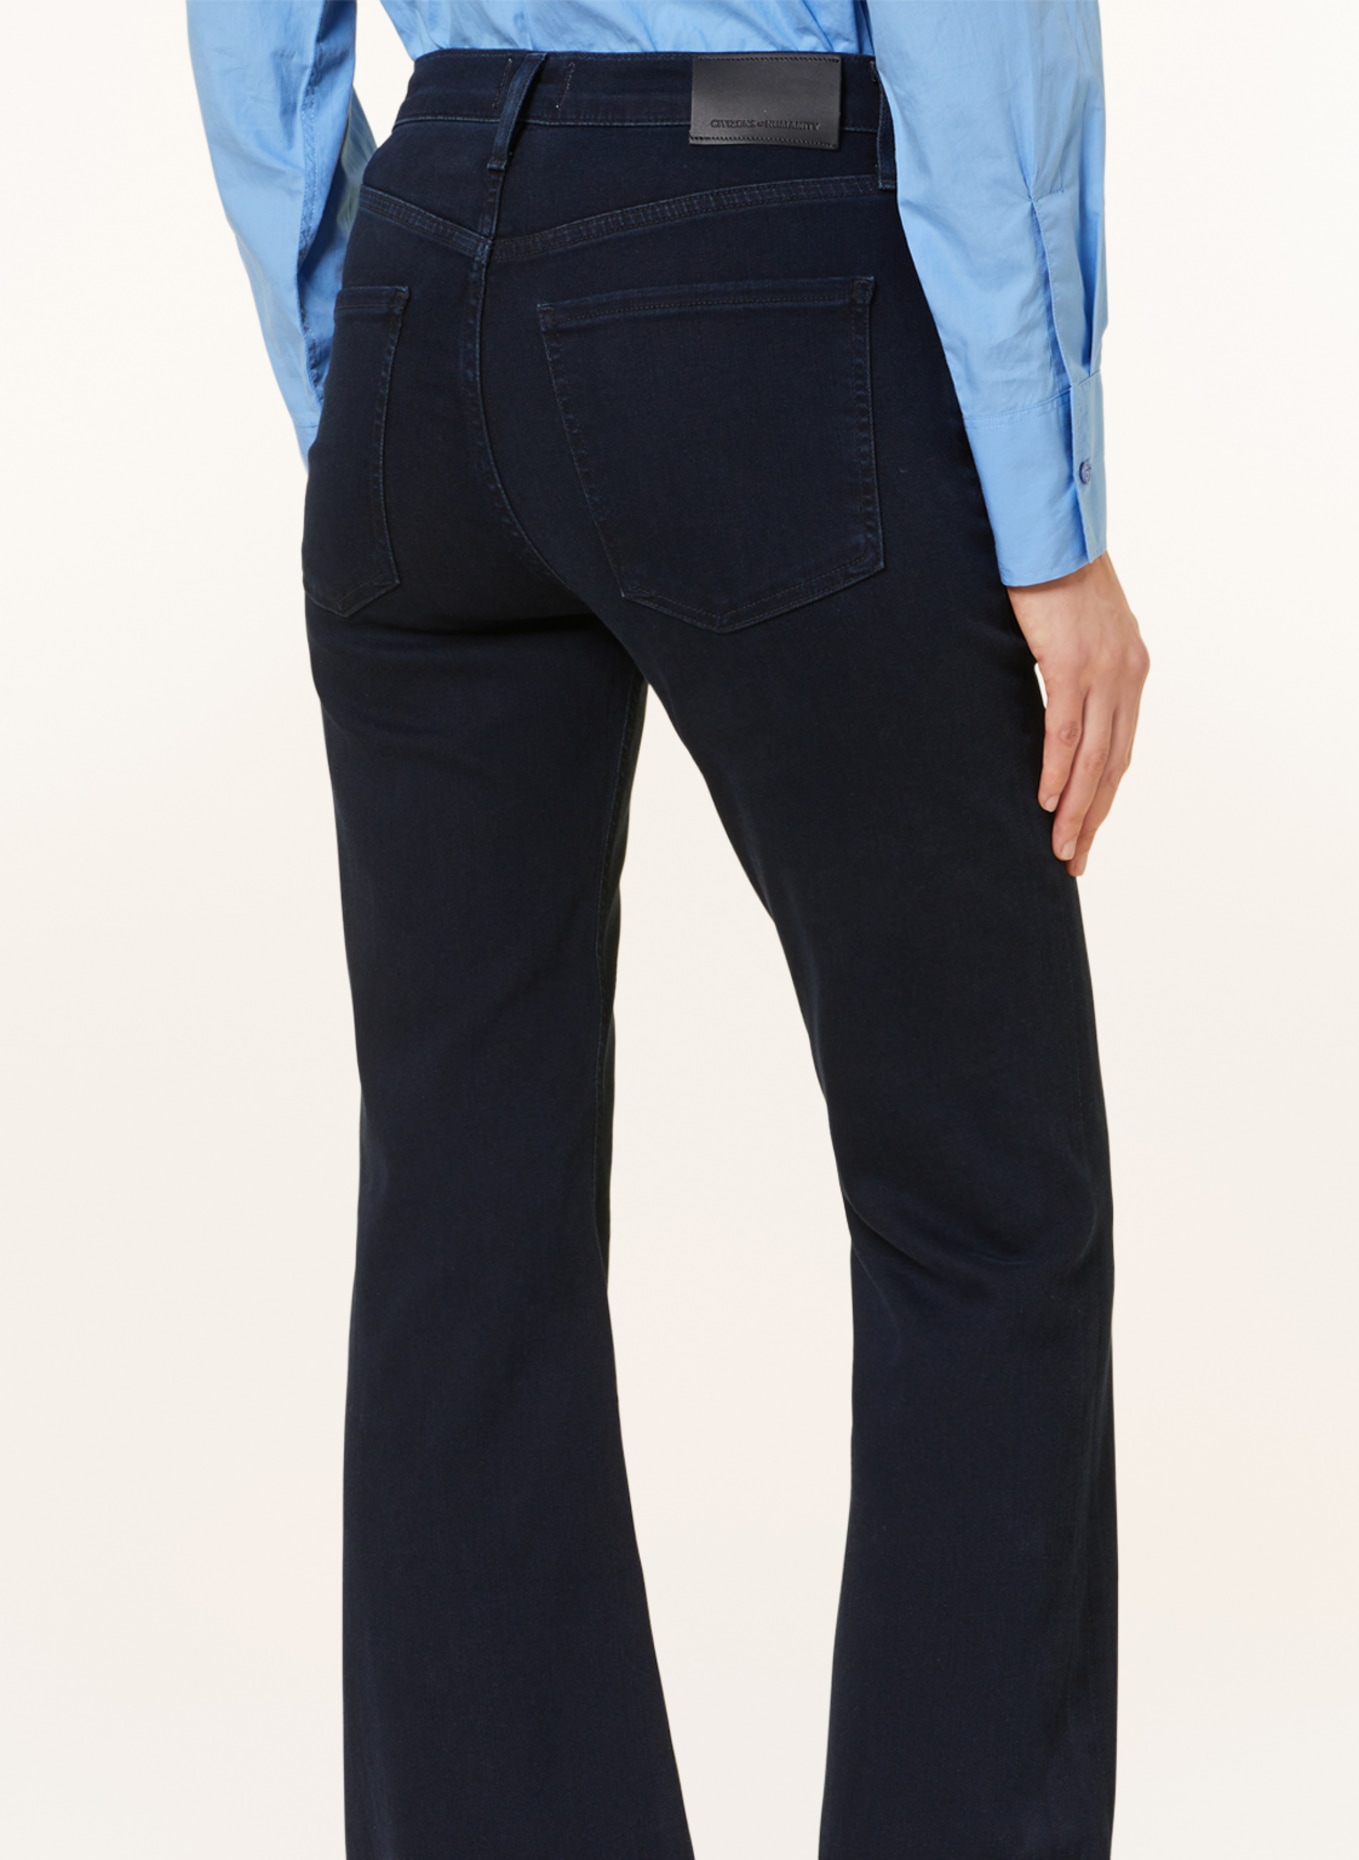 CITIZENS of HUMANITY Flared jeans ISOLA, Color: Chamber dk indigo (Image 5)